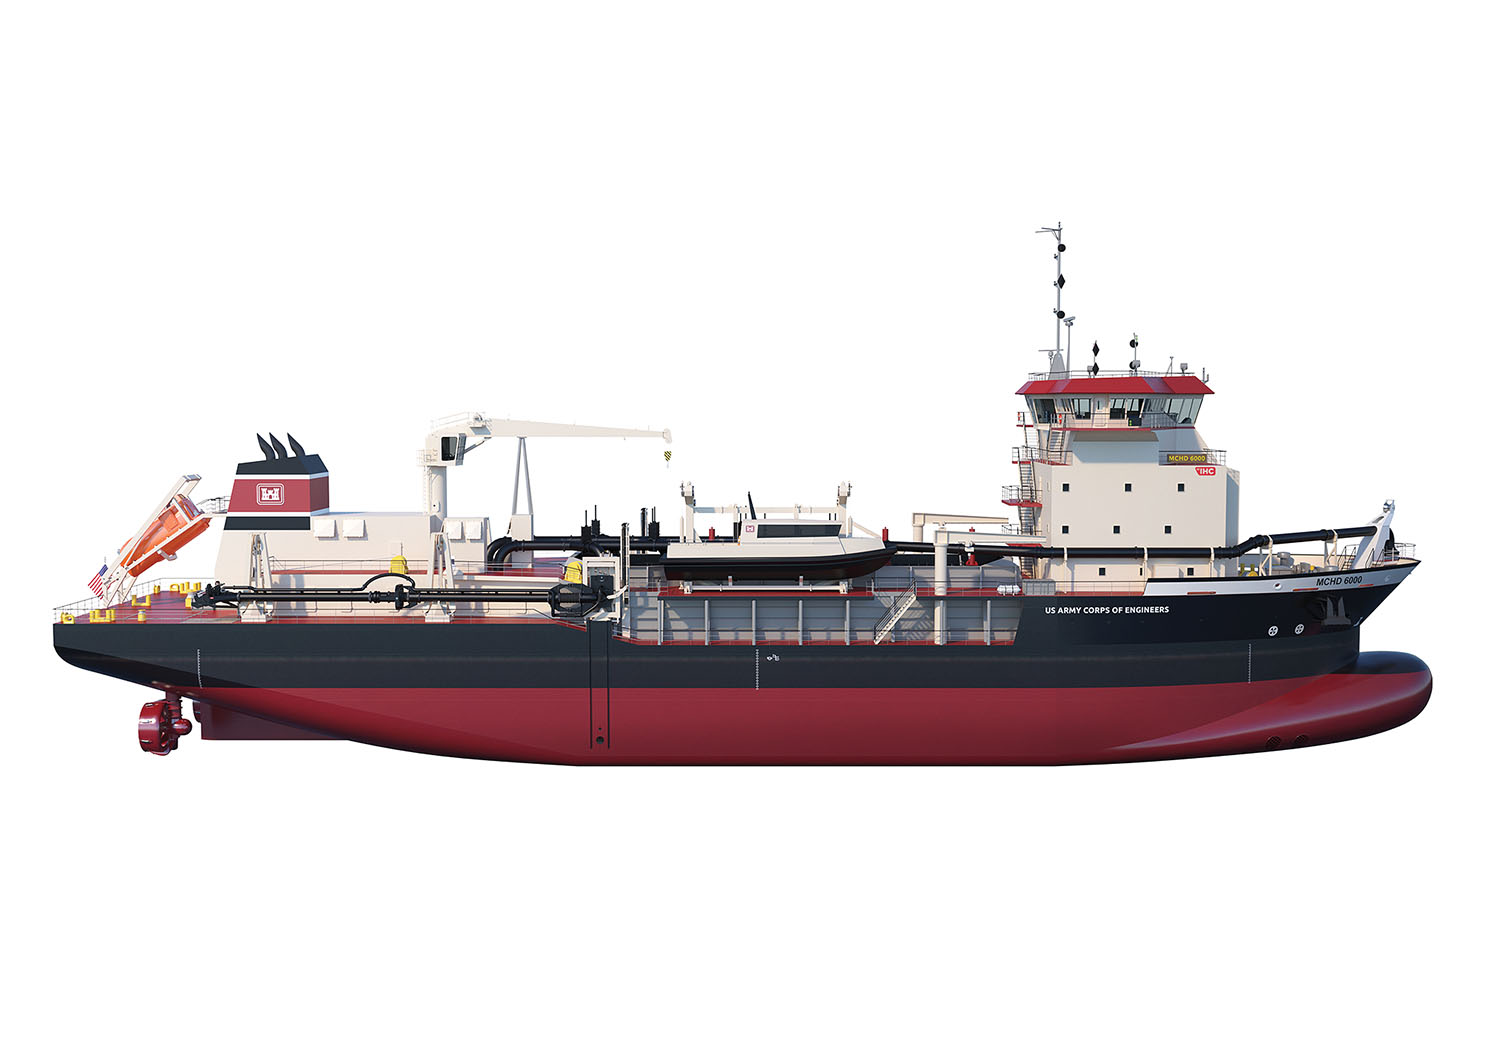 Rendering of new medium-class hopper dredge for the Corps of Engineers that will replace the Dredge McFarland. (Courtesy of Eastern Shipbuilding Group)